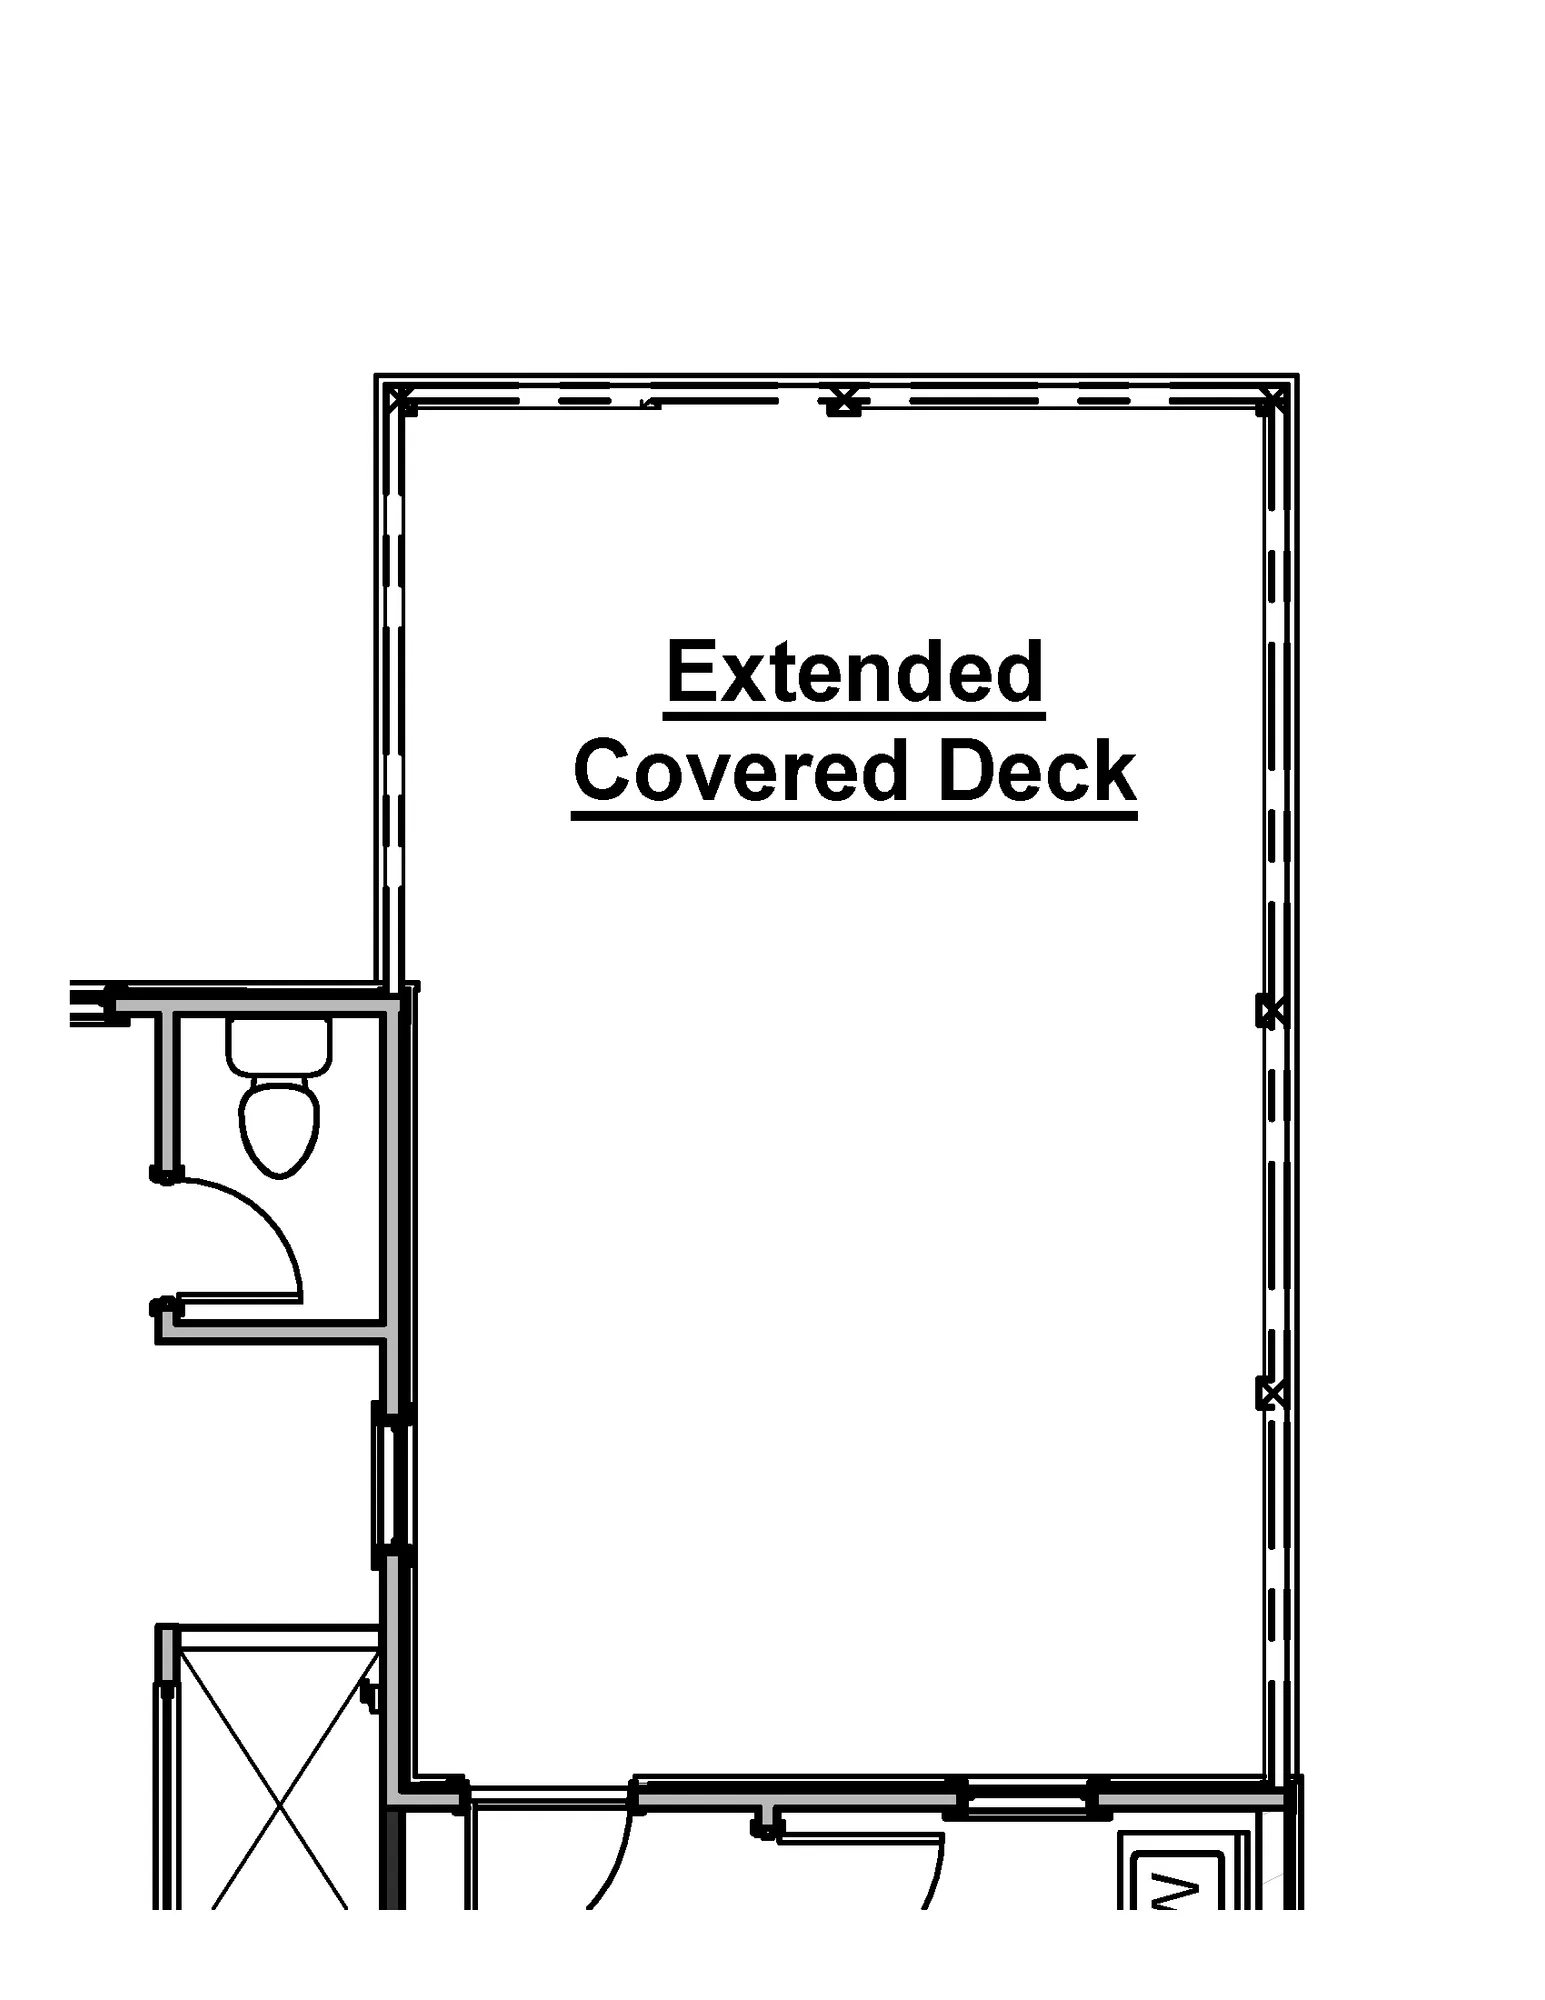 Covered Deck Extension - undefined